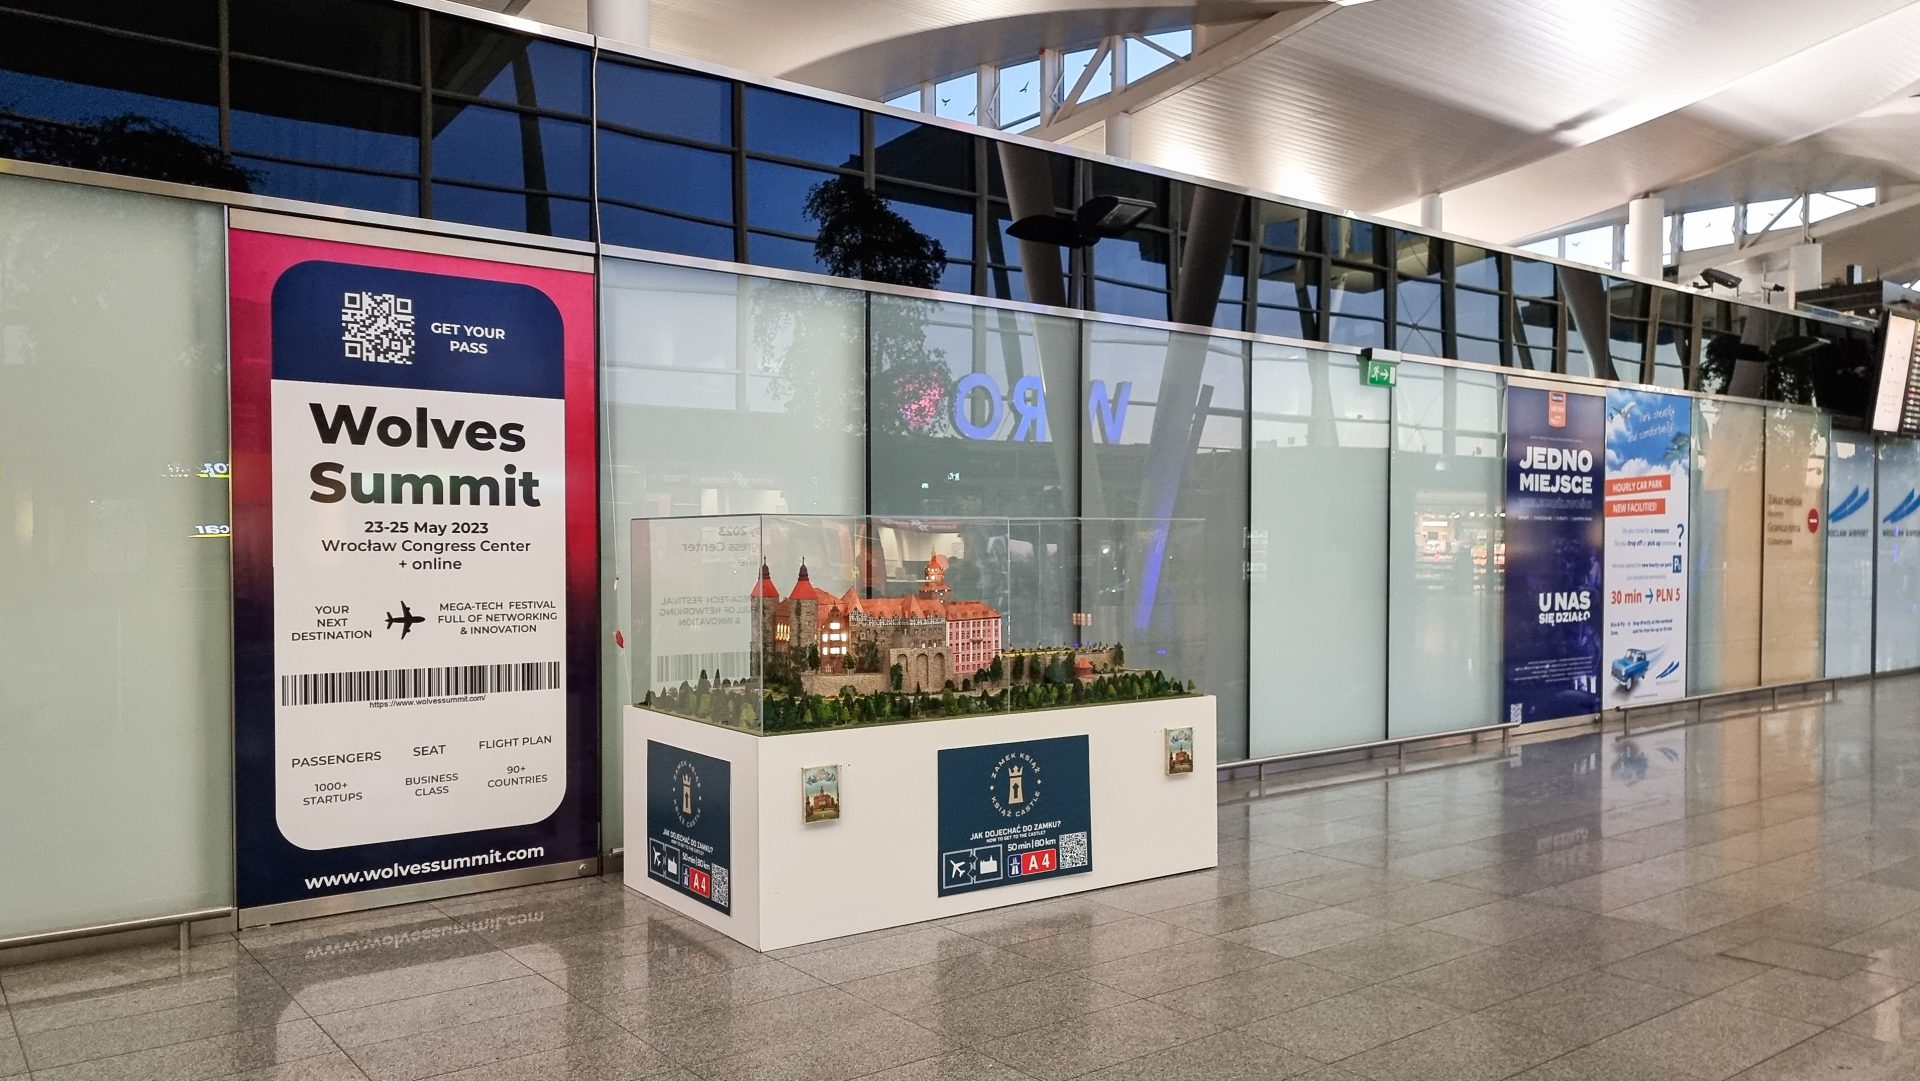 Wolves Summit billboards at the Copernicus Airport Wroclaw